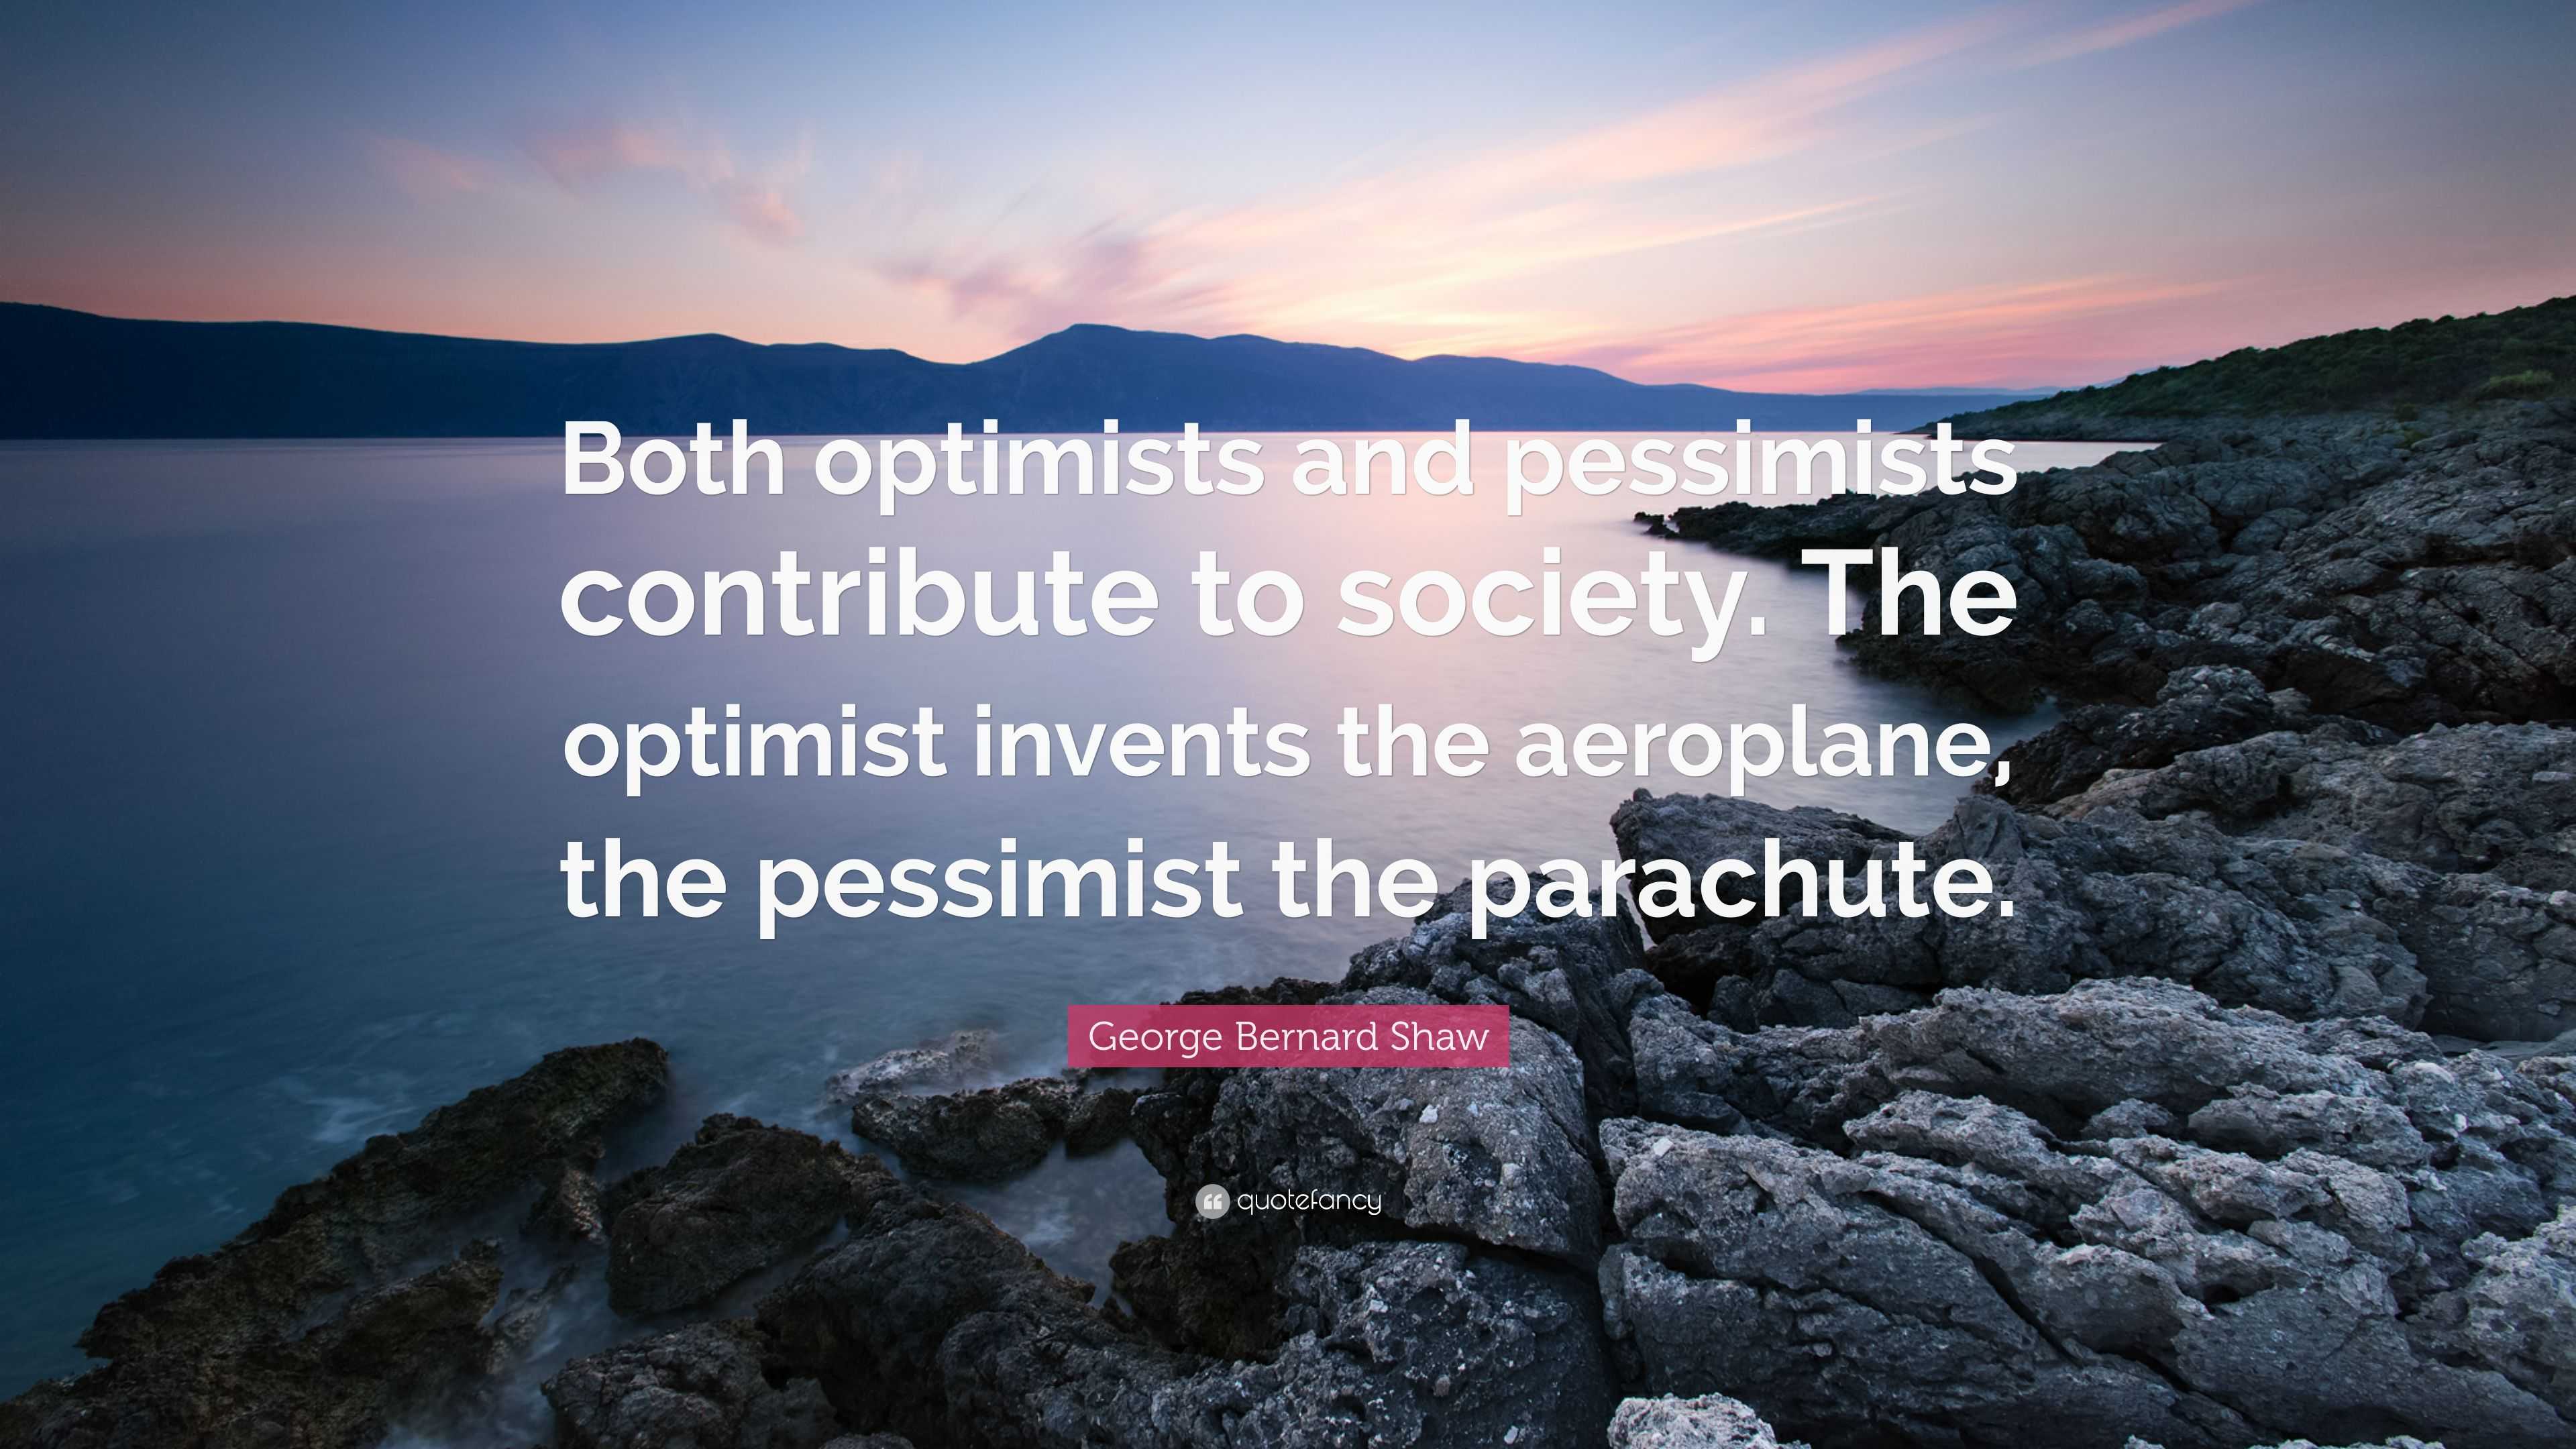 optimism and pessimism are both delusion